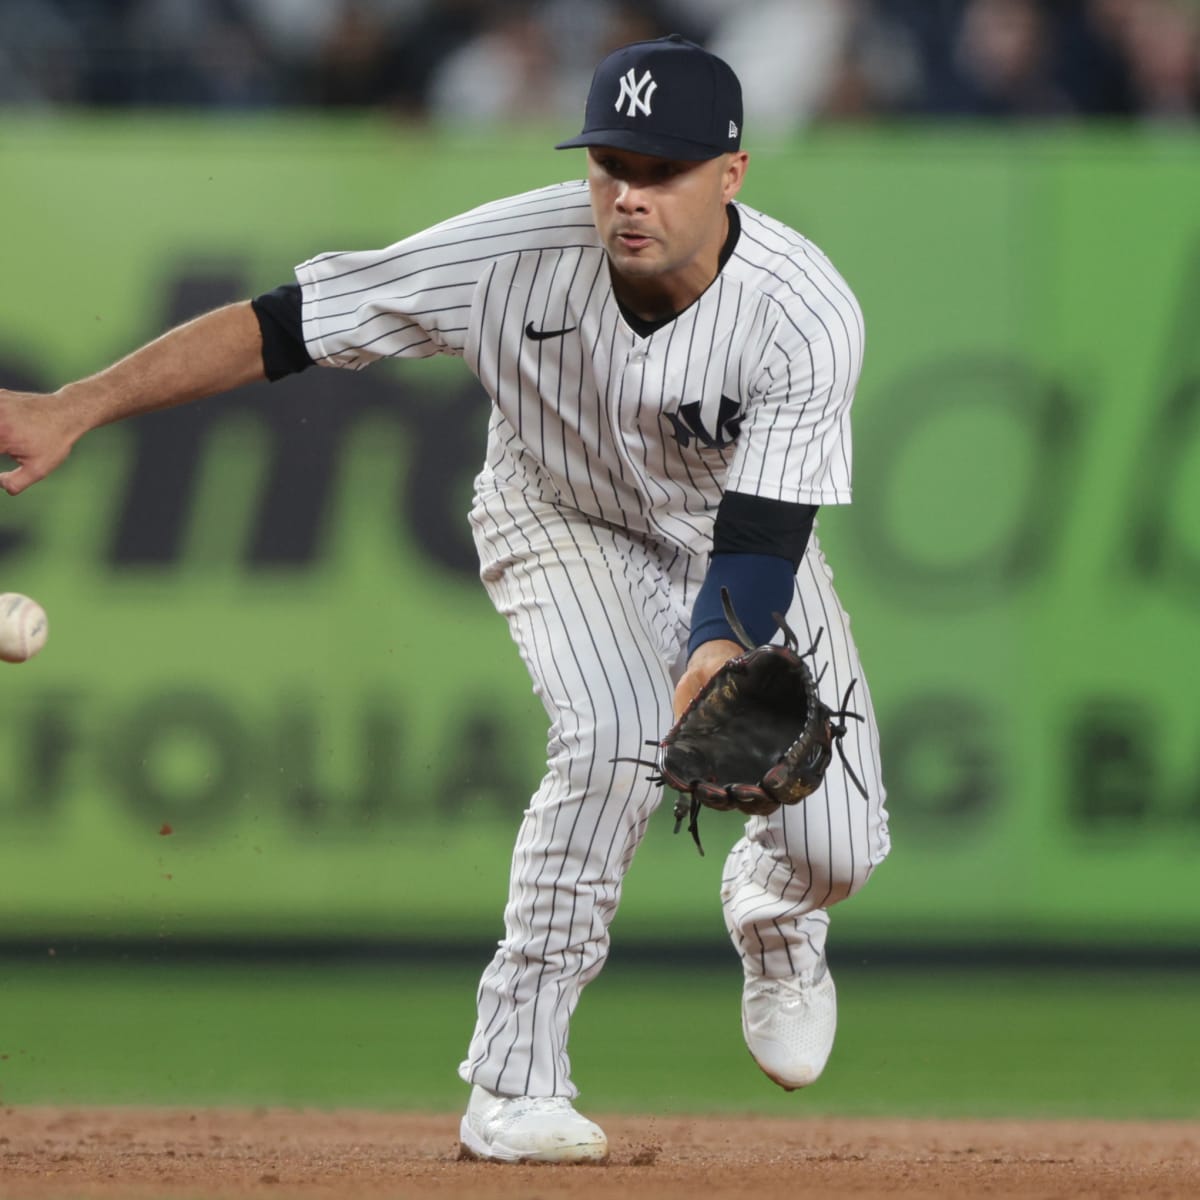 The error Yankees' Isiah Kiner-Falefa made that led to his